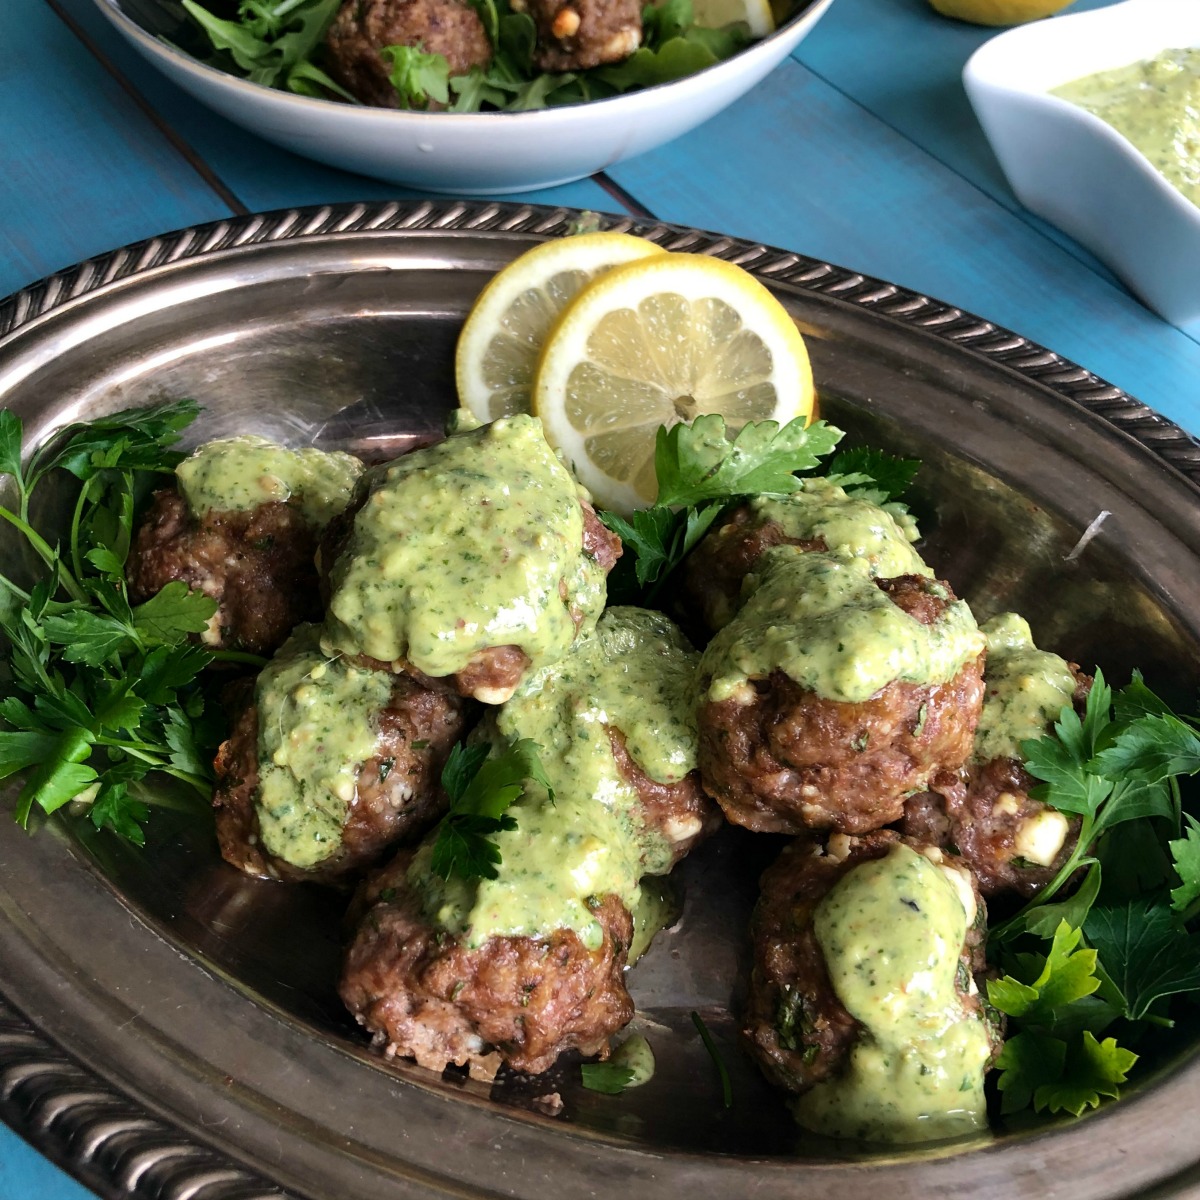 How to Make Greek Feta Lamb Meatballs from Spinach Tiger